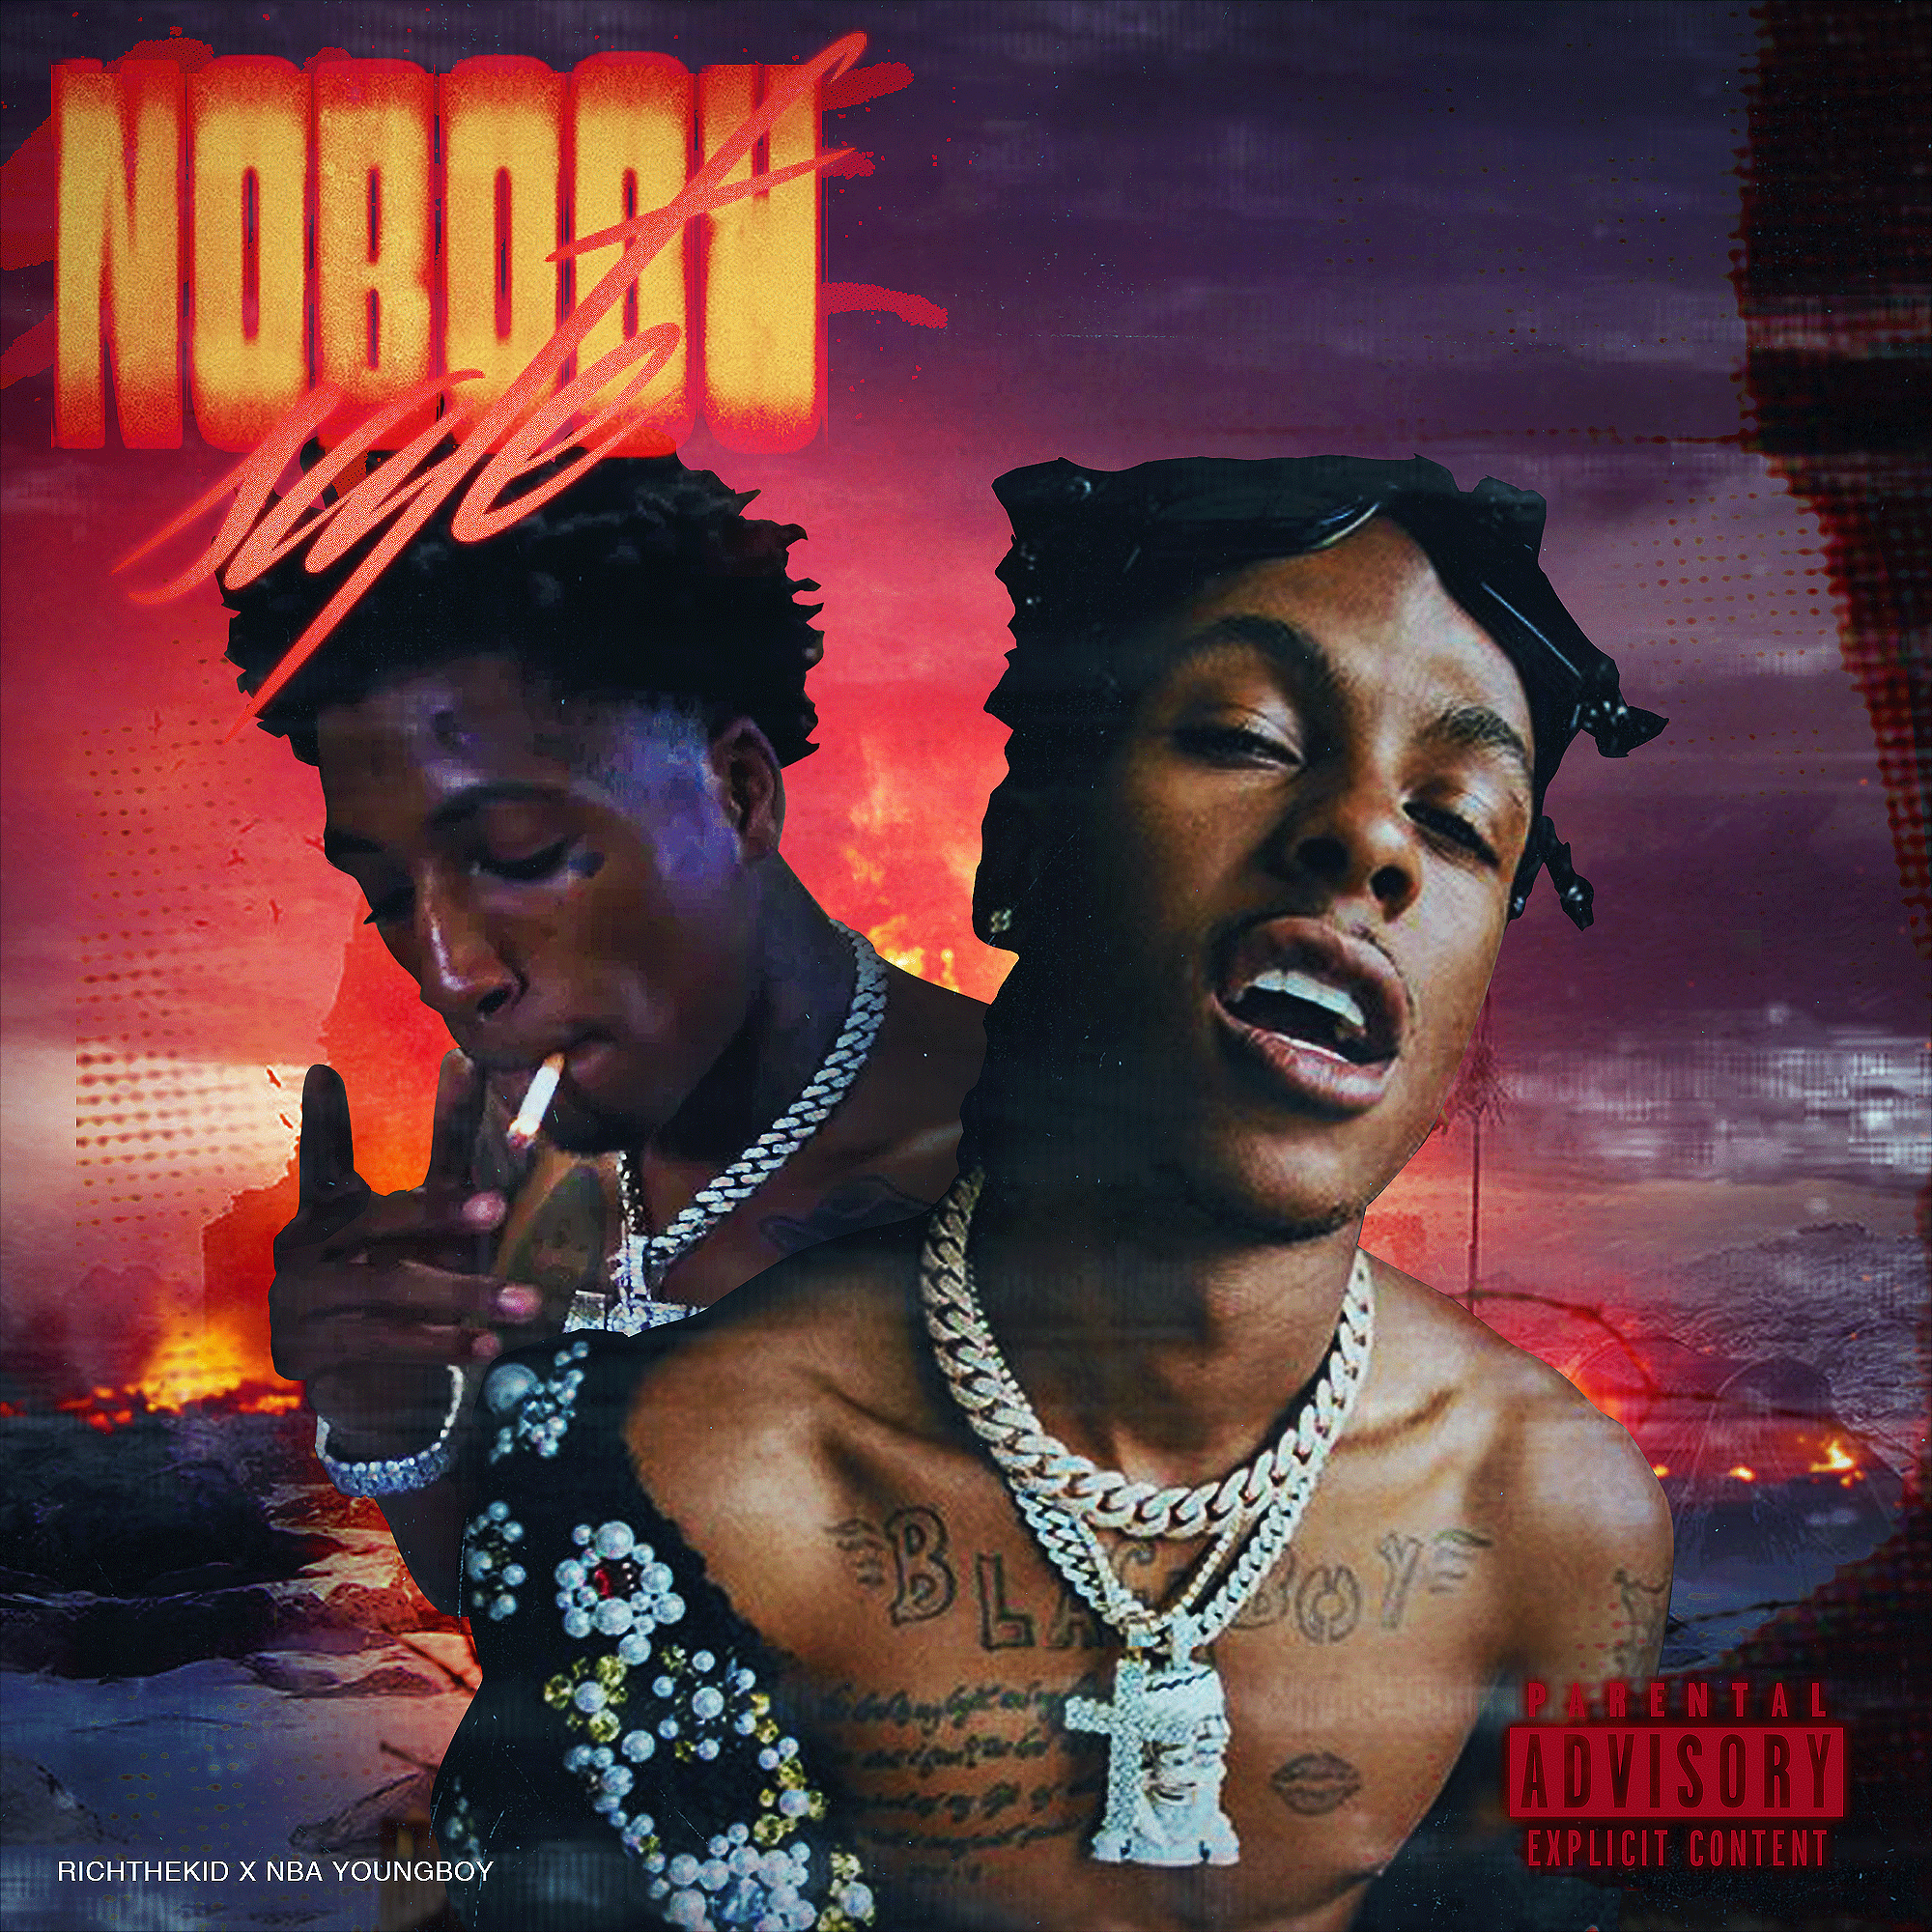 Maxdg Safe Cover art for & NBA Youngboy By me & Please tag !!